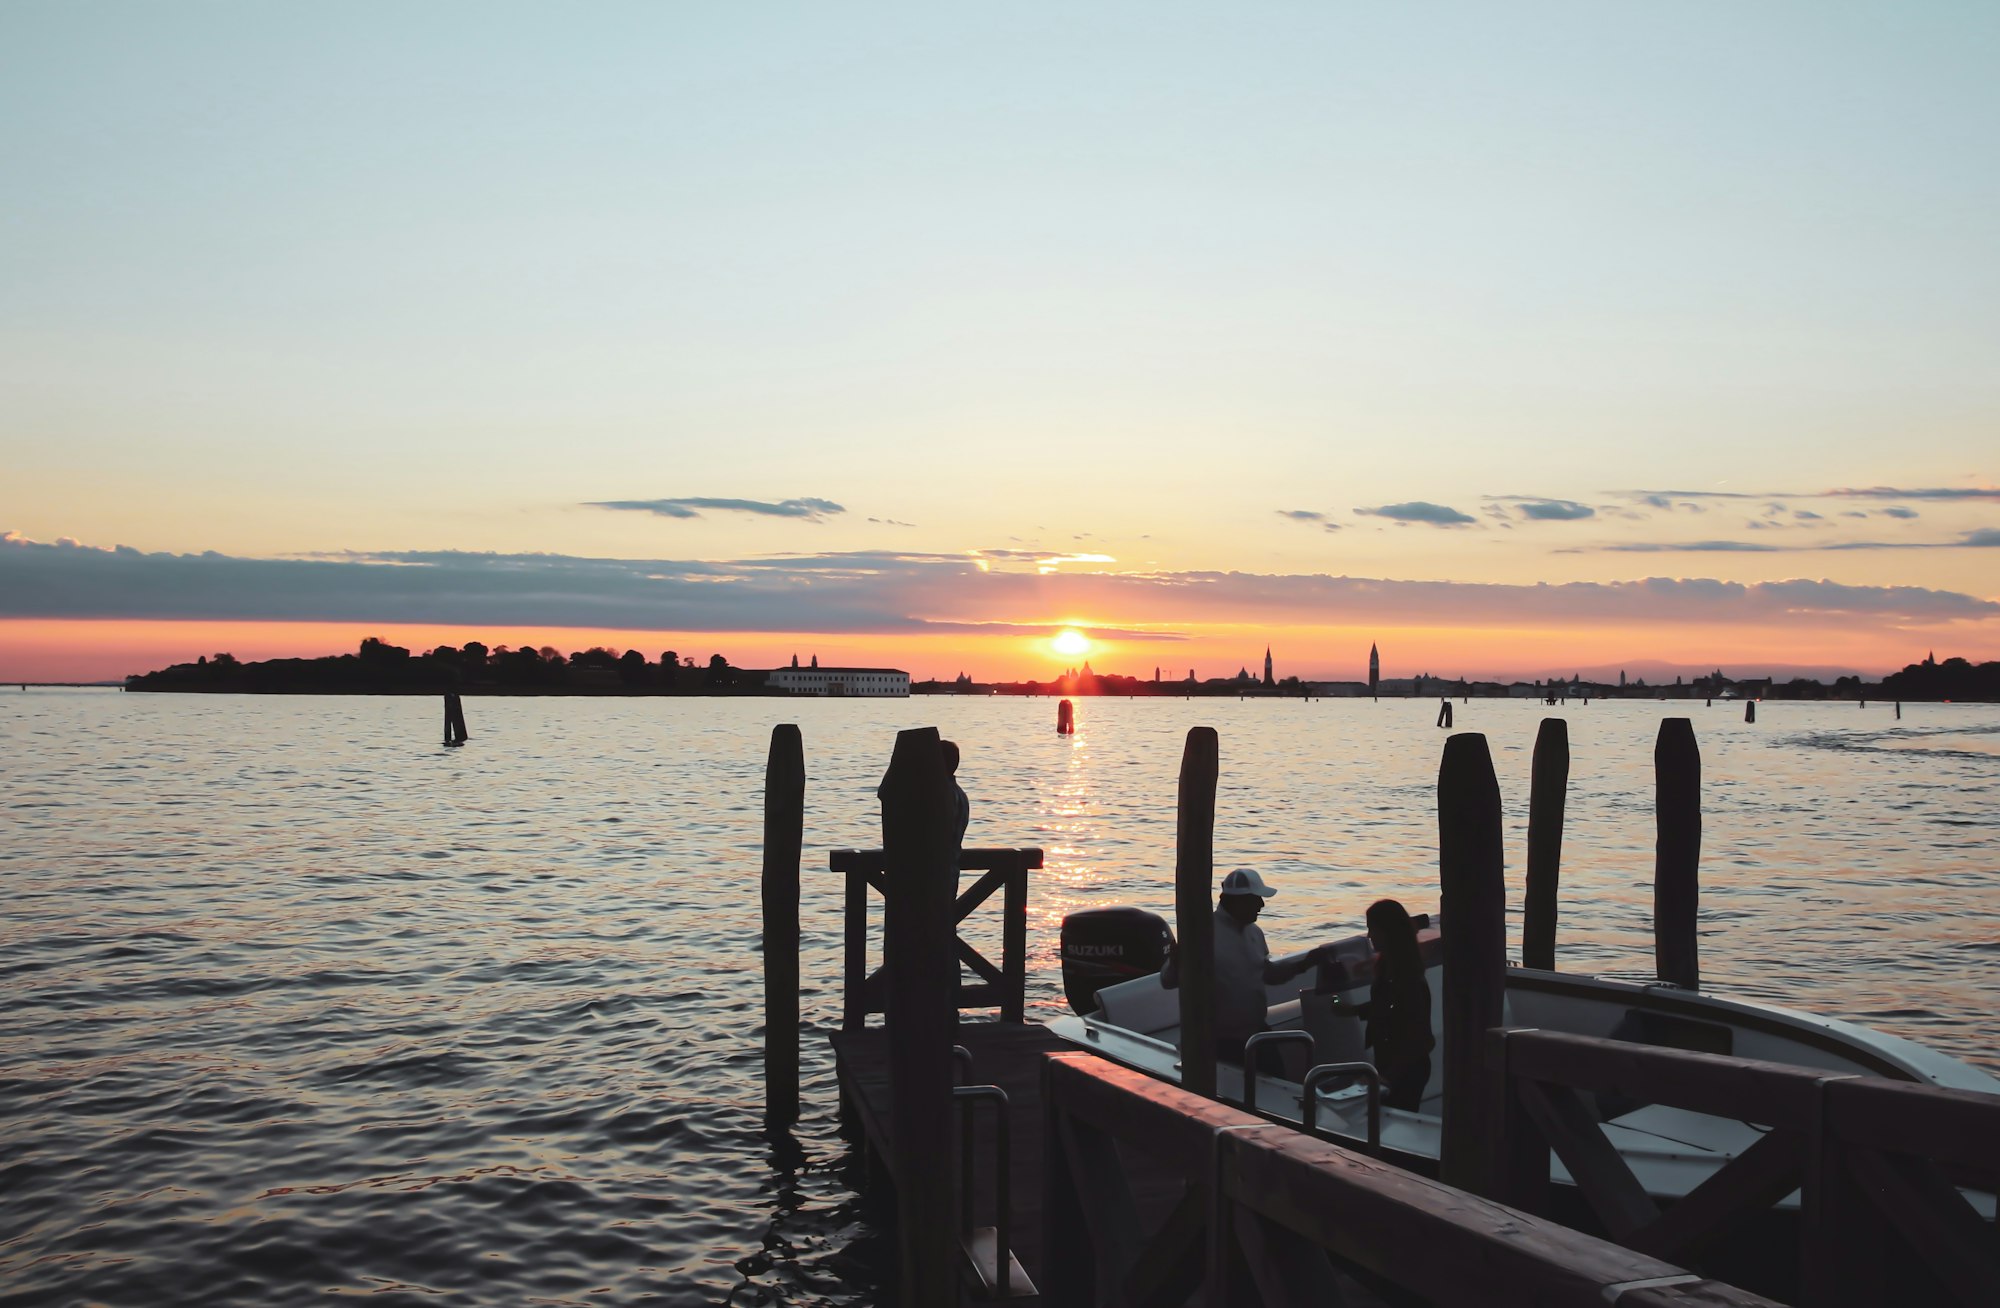 Venice Lido: your guide to the glamorous beach of Venice